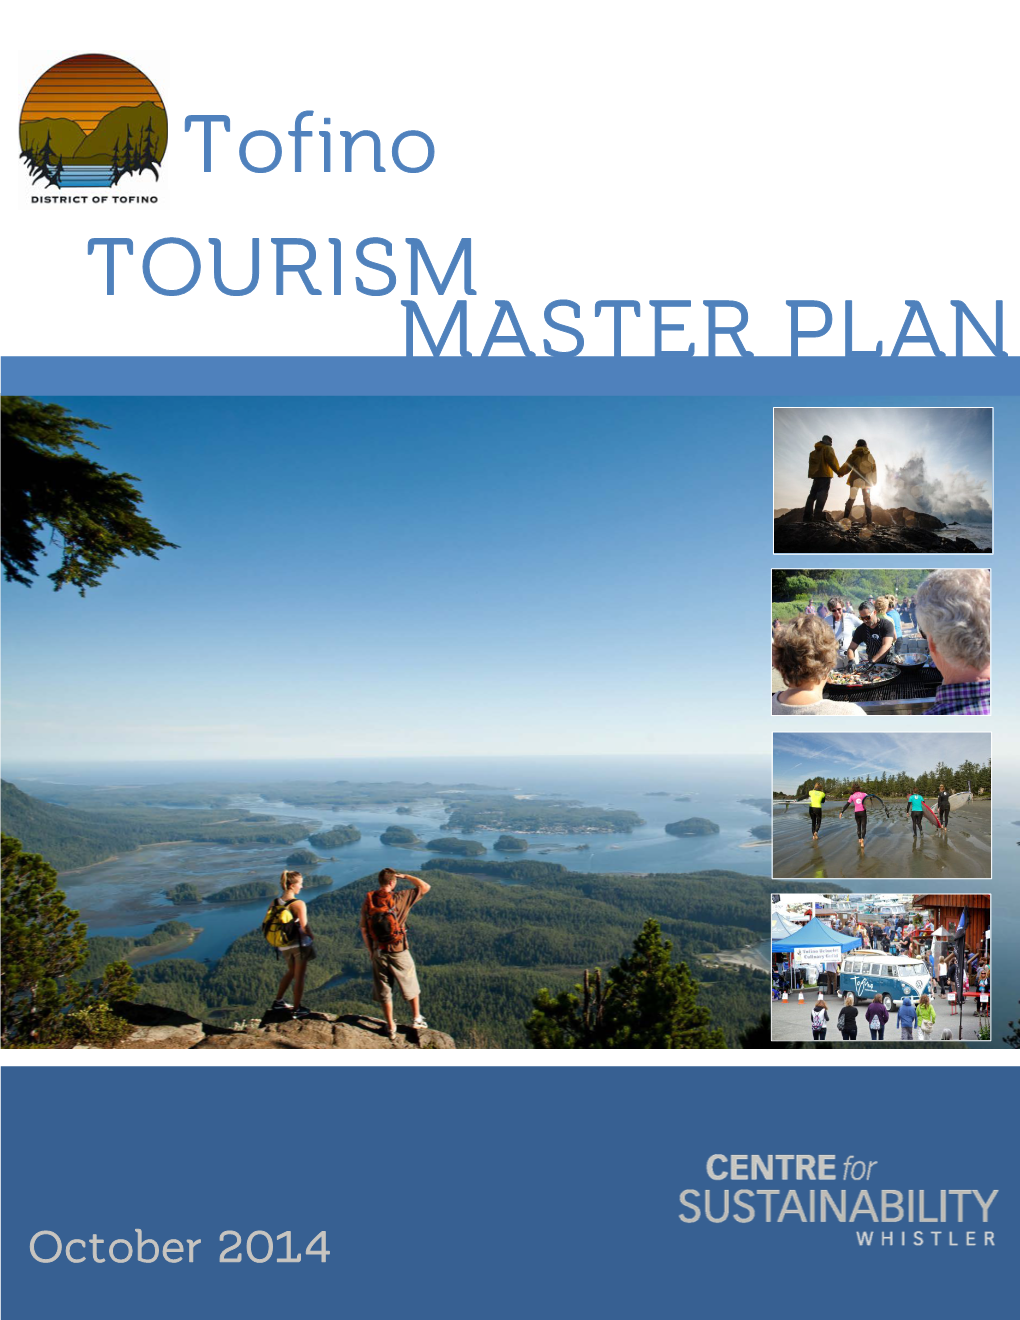 Tofino Tourism Master Plan Process Was Facilitated by the Whistler Centre for Sustainability Through the Following Five Steps